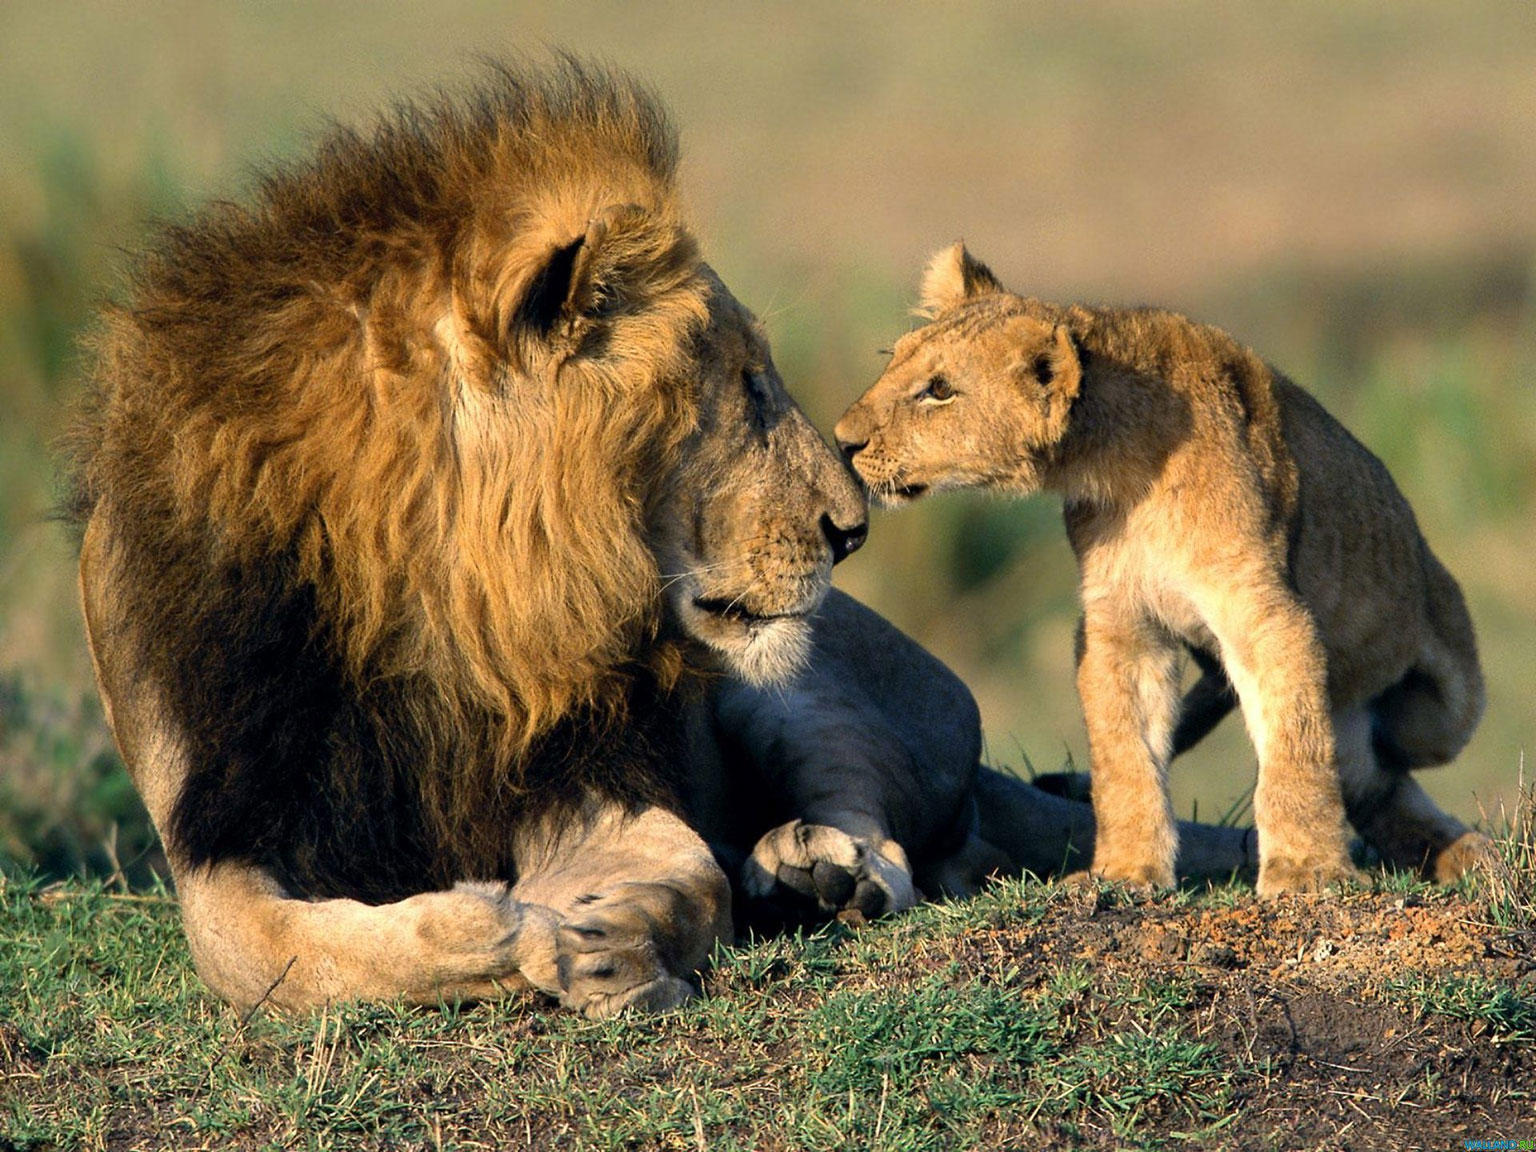 Cub with full grown male lion